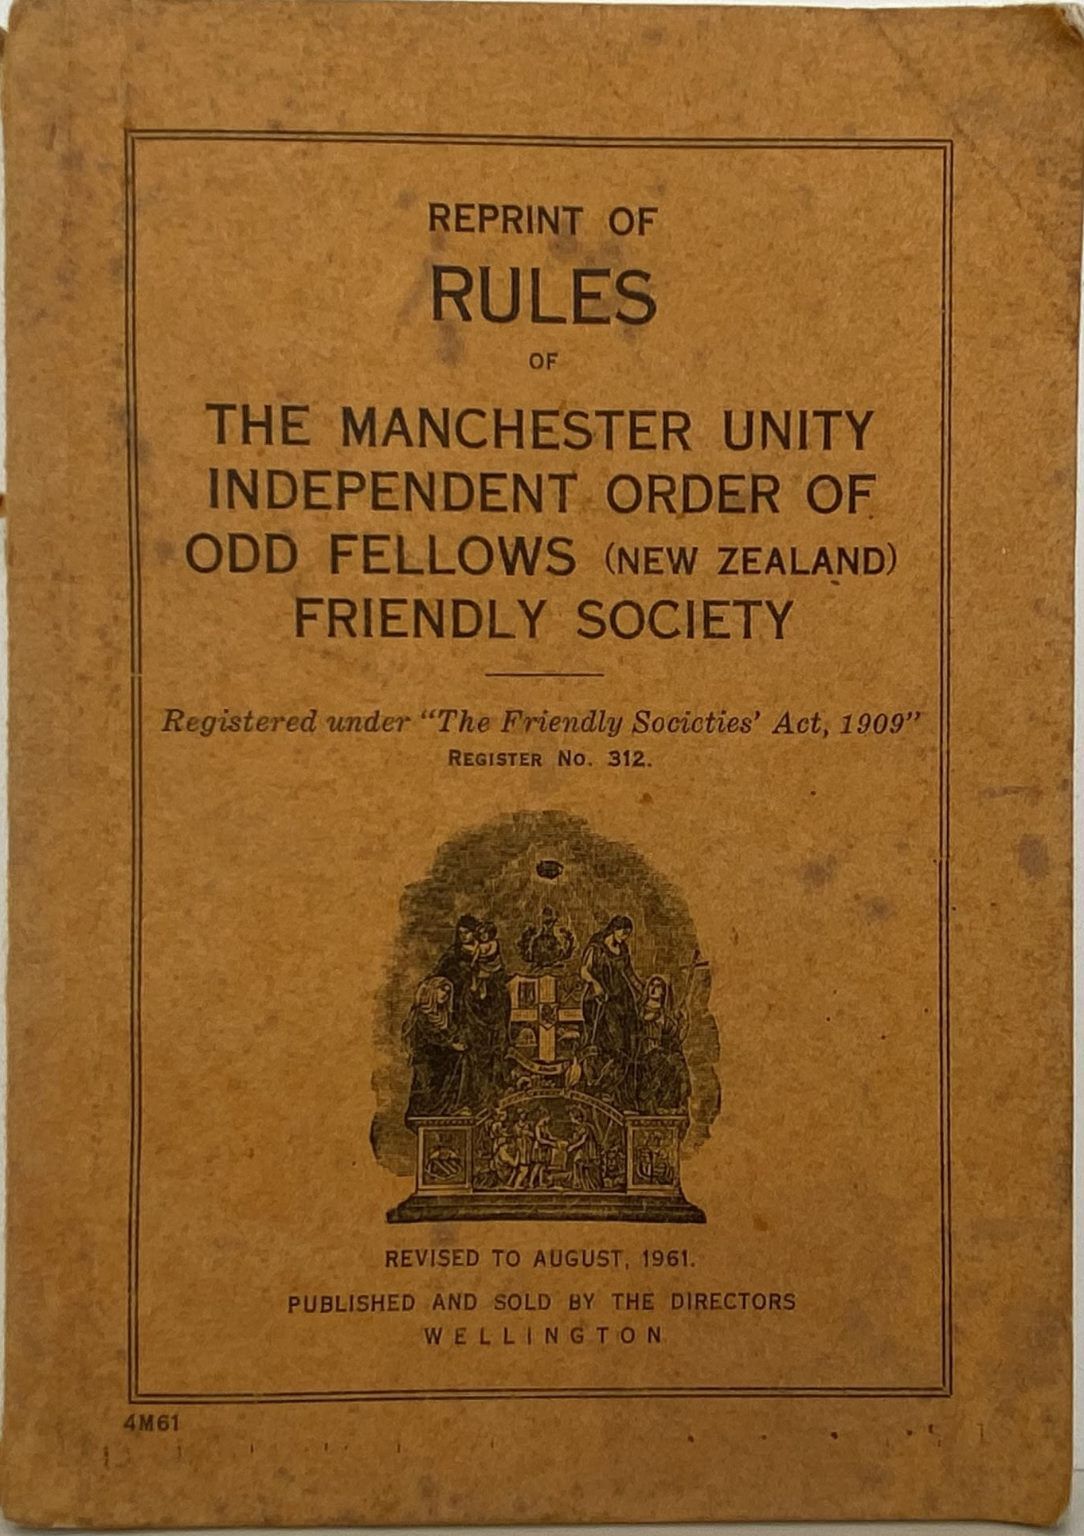 RULES of The Manchester Unity Independent Order of Odd Fellows Society